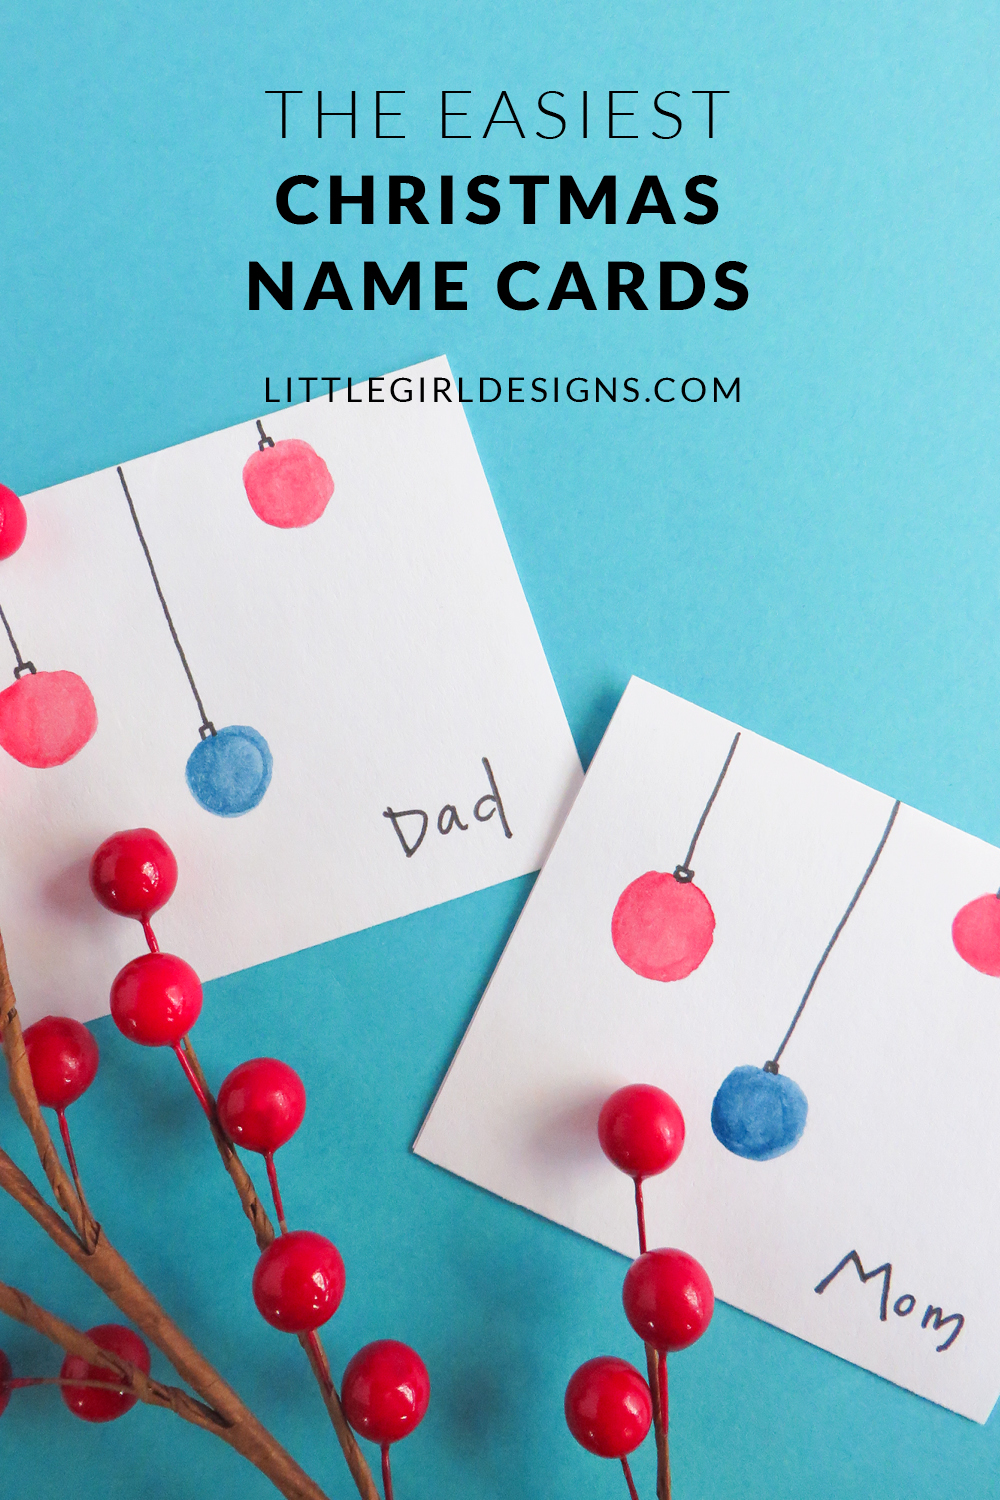 The Easiest Christmas Name Cards - How to make the easiest name cards for Christmas dinner ever. These are so sweet and can be made with whatever colors you'd like! via littlegirldesigns.com